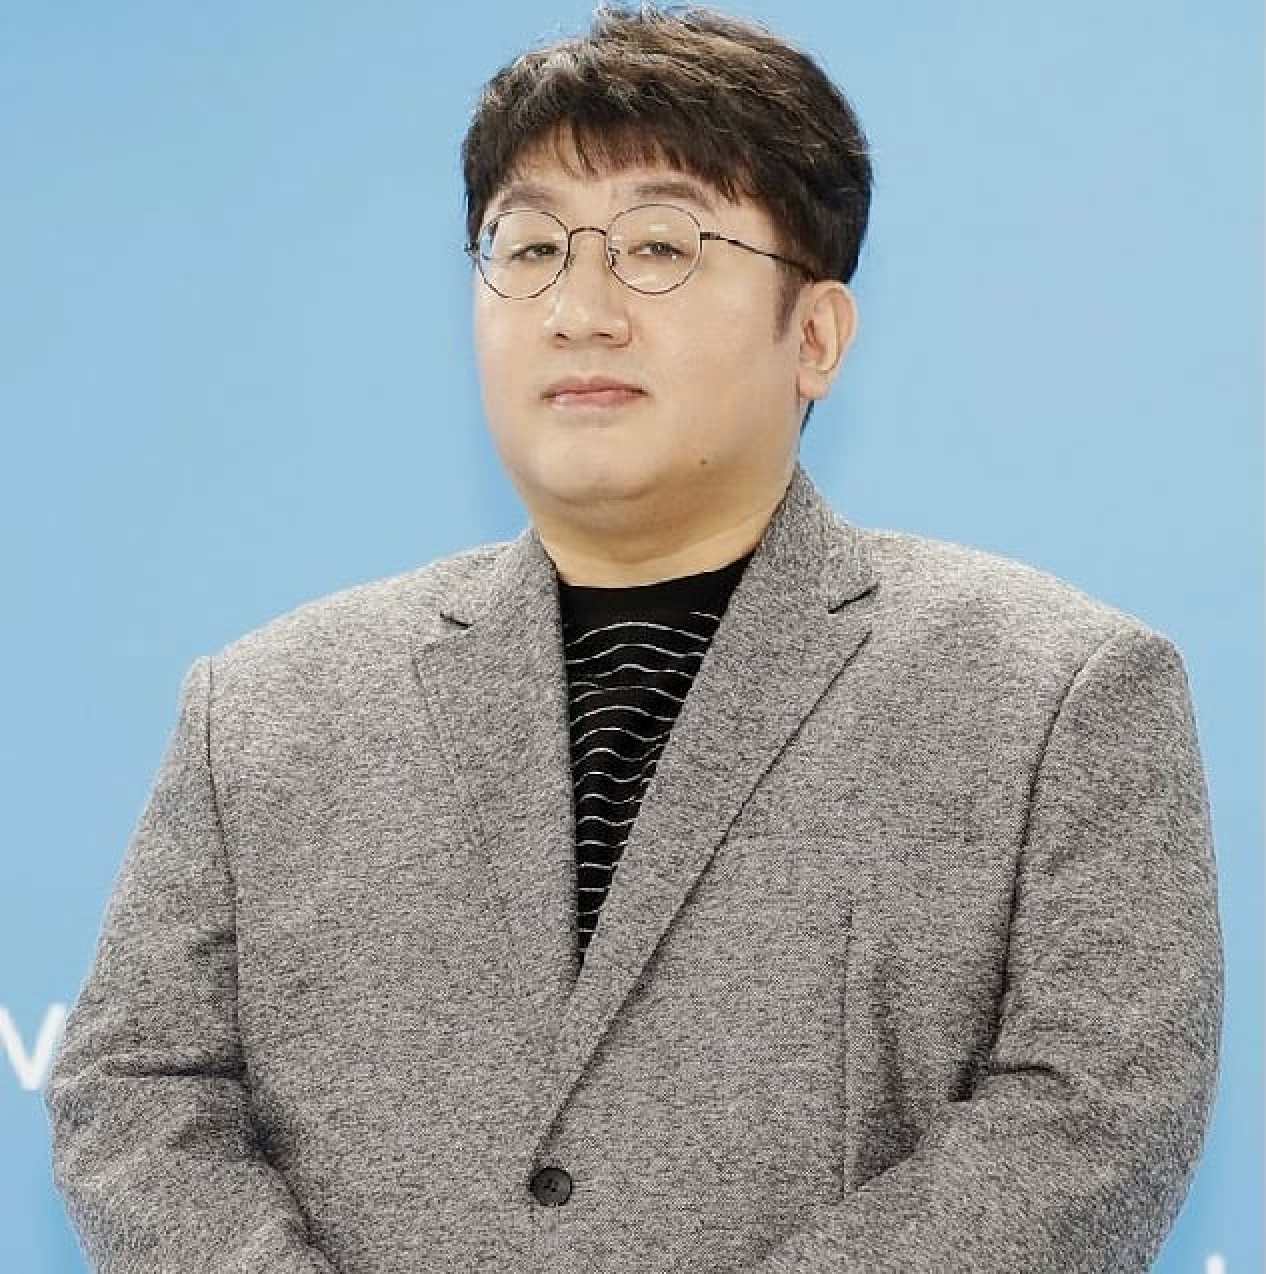 Meet Bang Sihyuk, the mastermind behind BTS and Kpop’s only